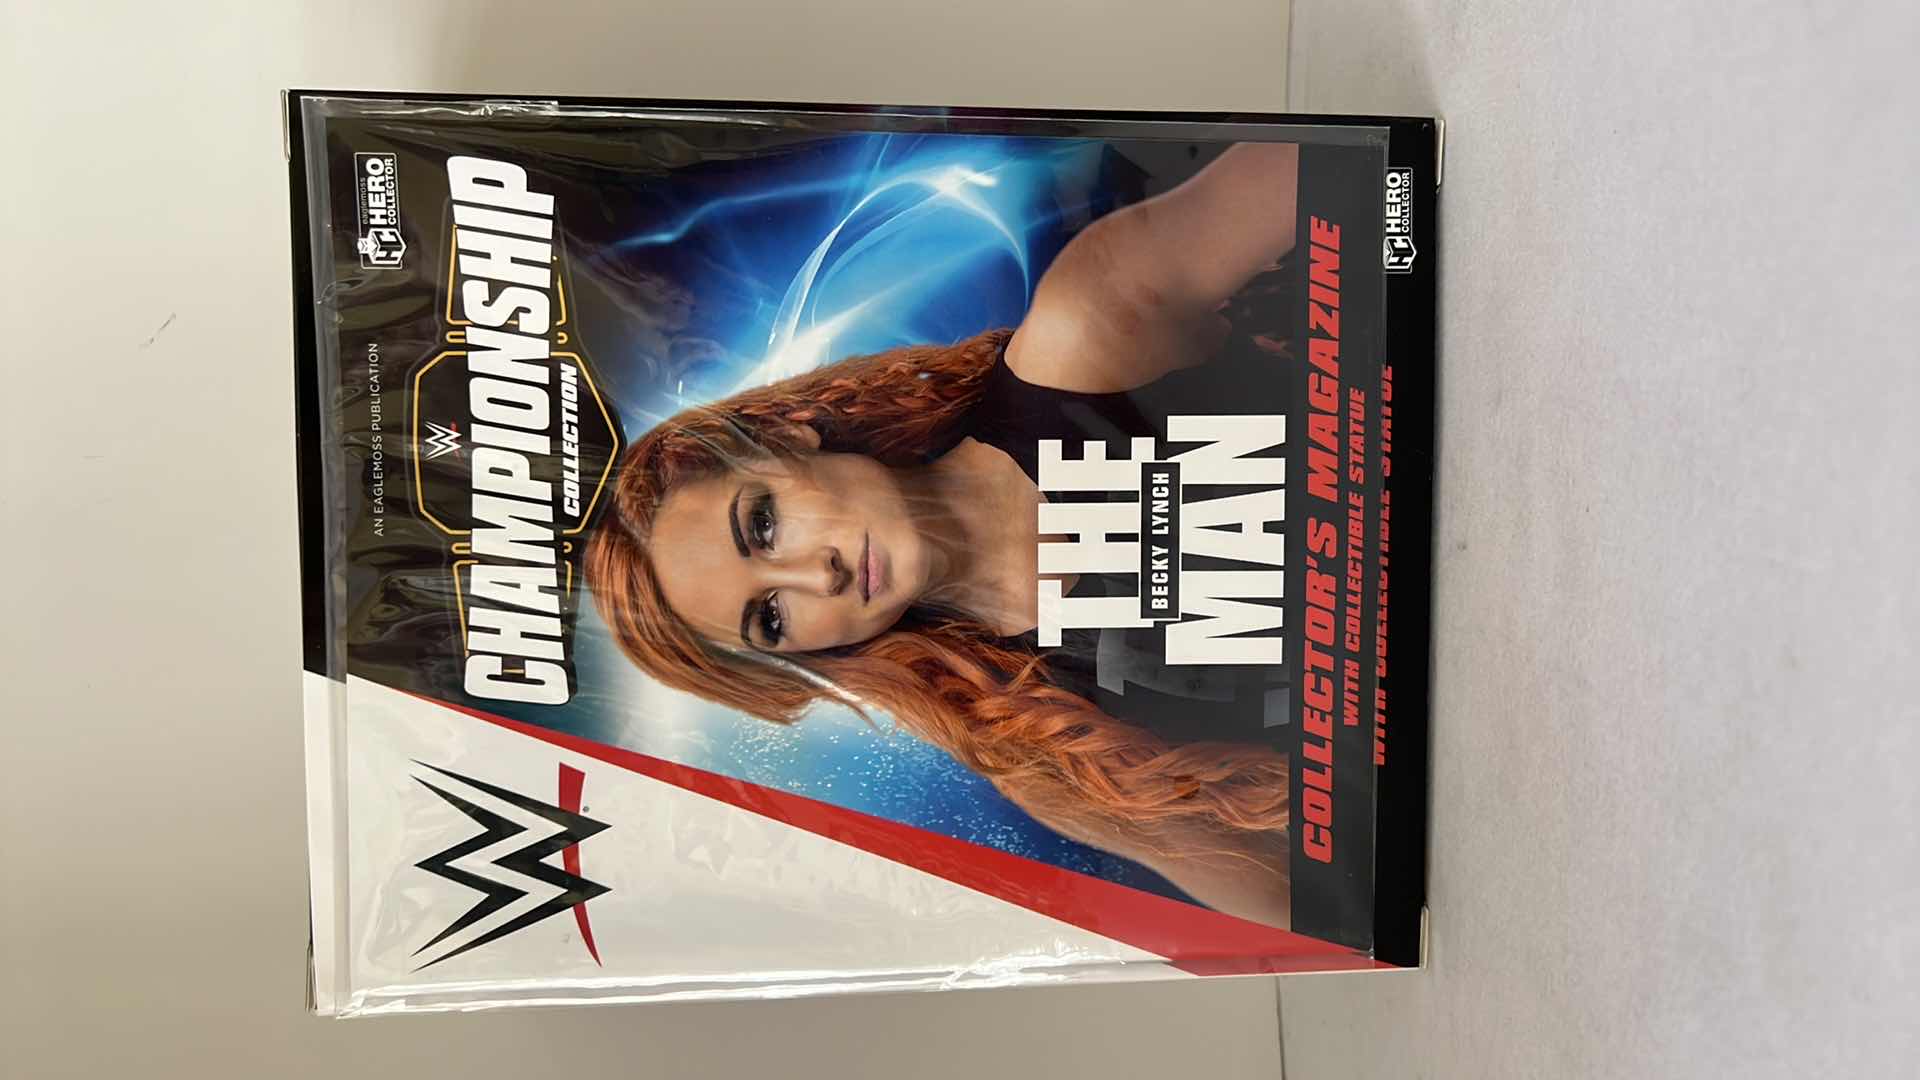 Photo 1 of BRAND NEW CHAMPIONSHIP COLLECTION WWE “BECKY LYNCH” COLLECTORS MAGAZINE W COLLECTIBLE STATUE